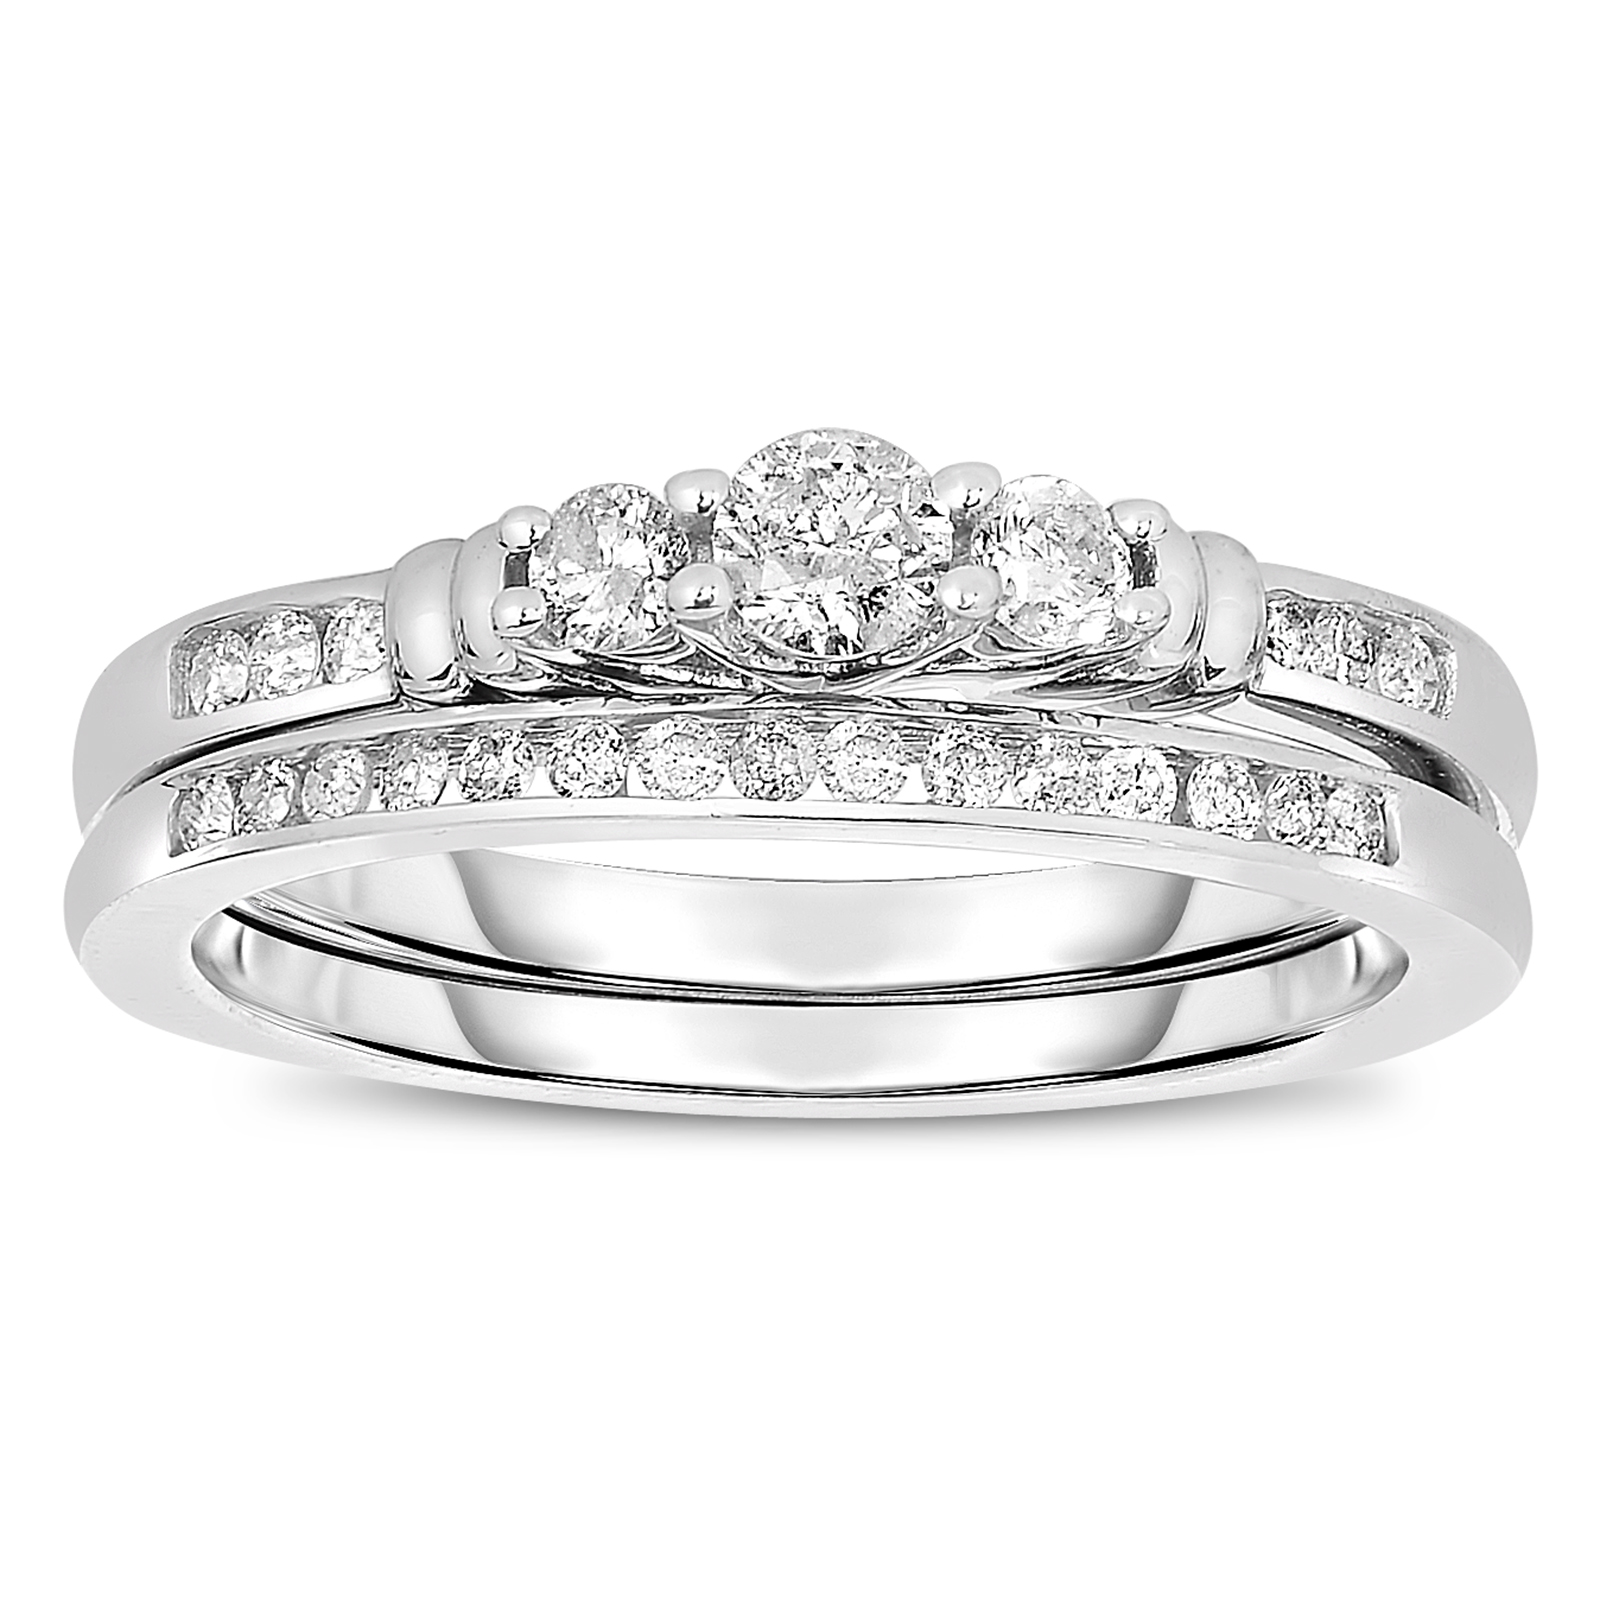 Linked In Love Platin&#233;e 1/2 cttw Diamond Bridal Set - Size 7 Only